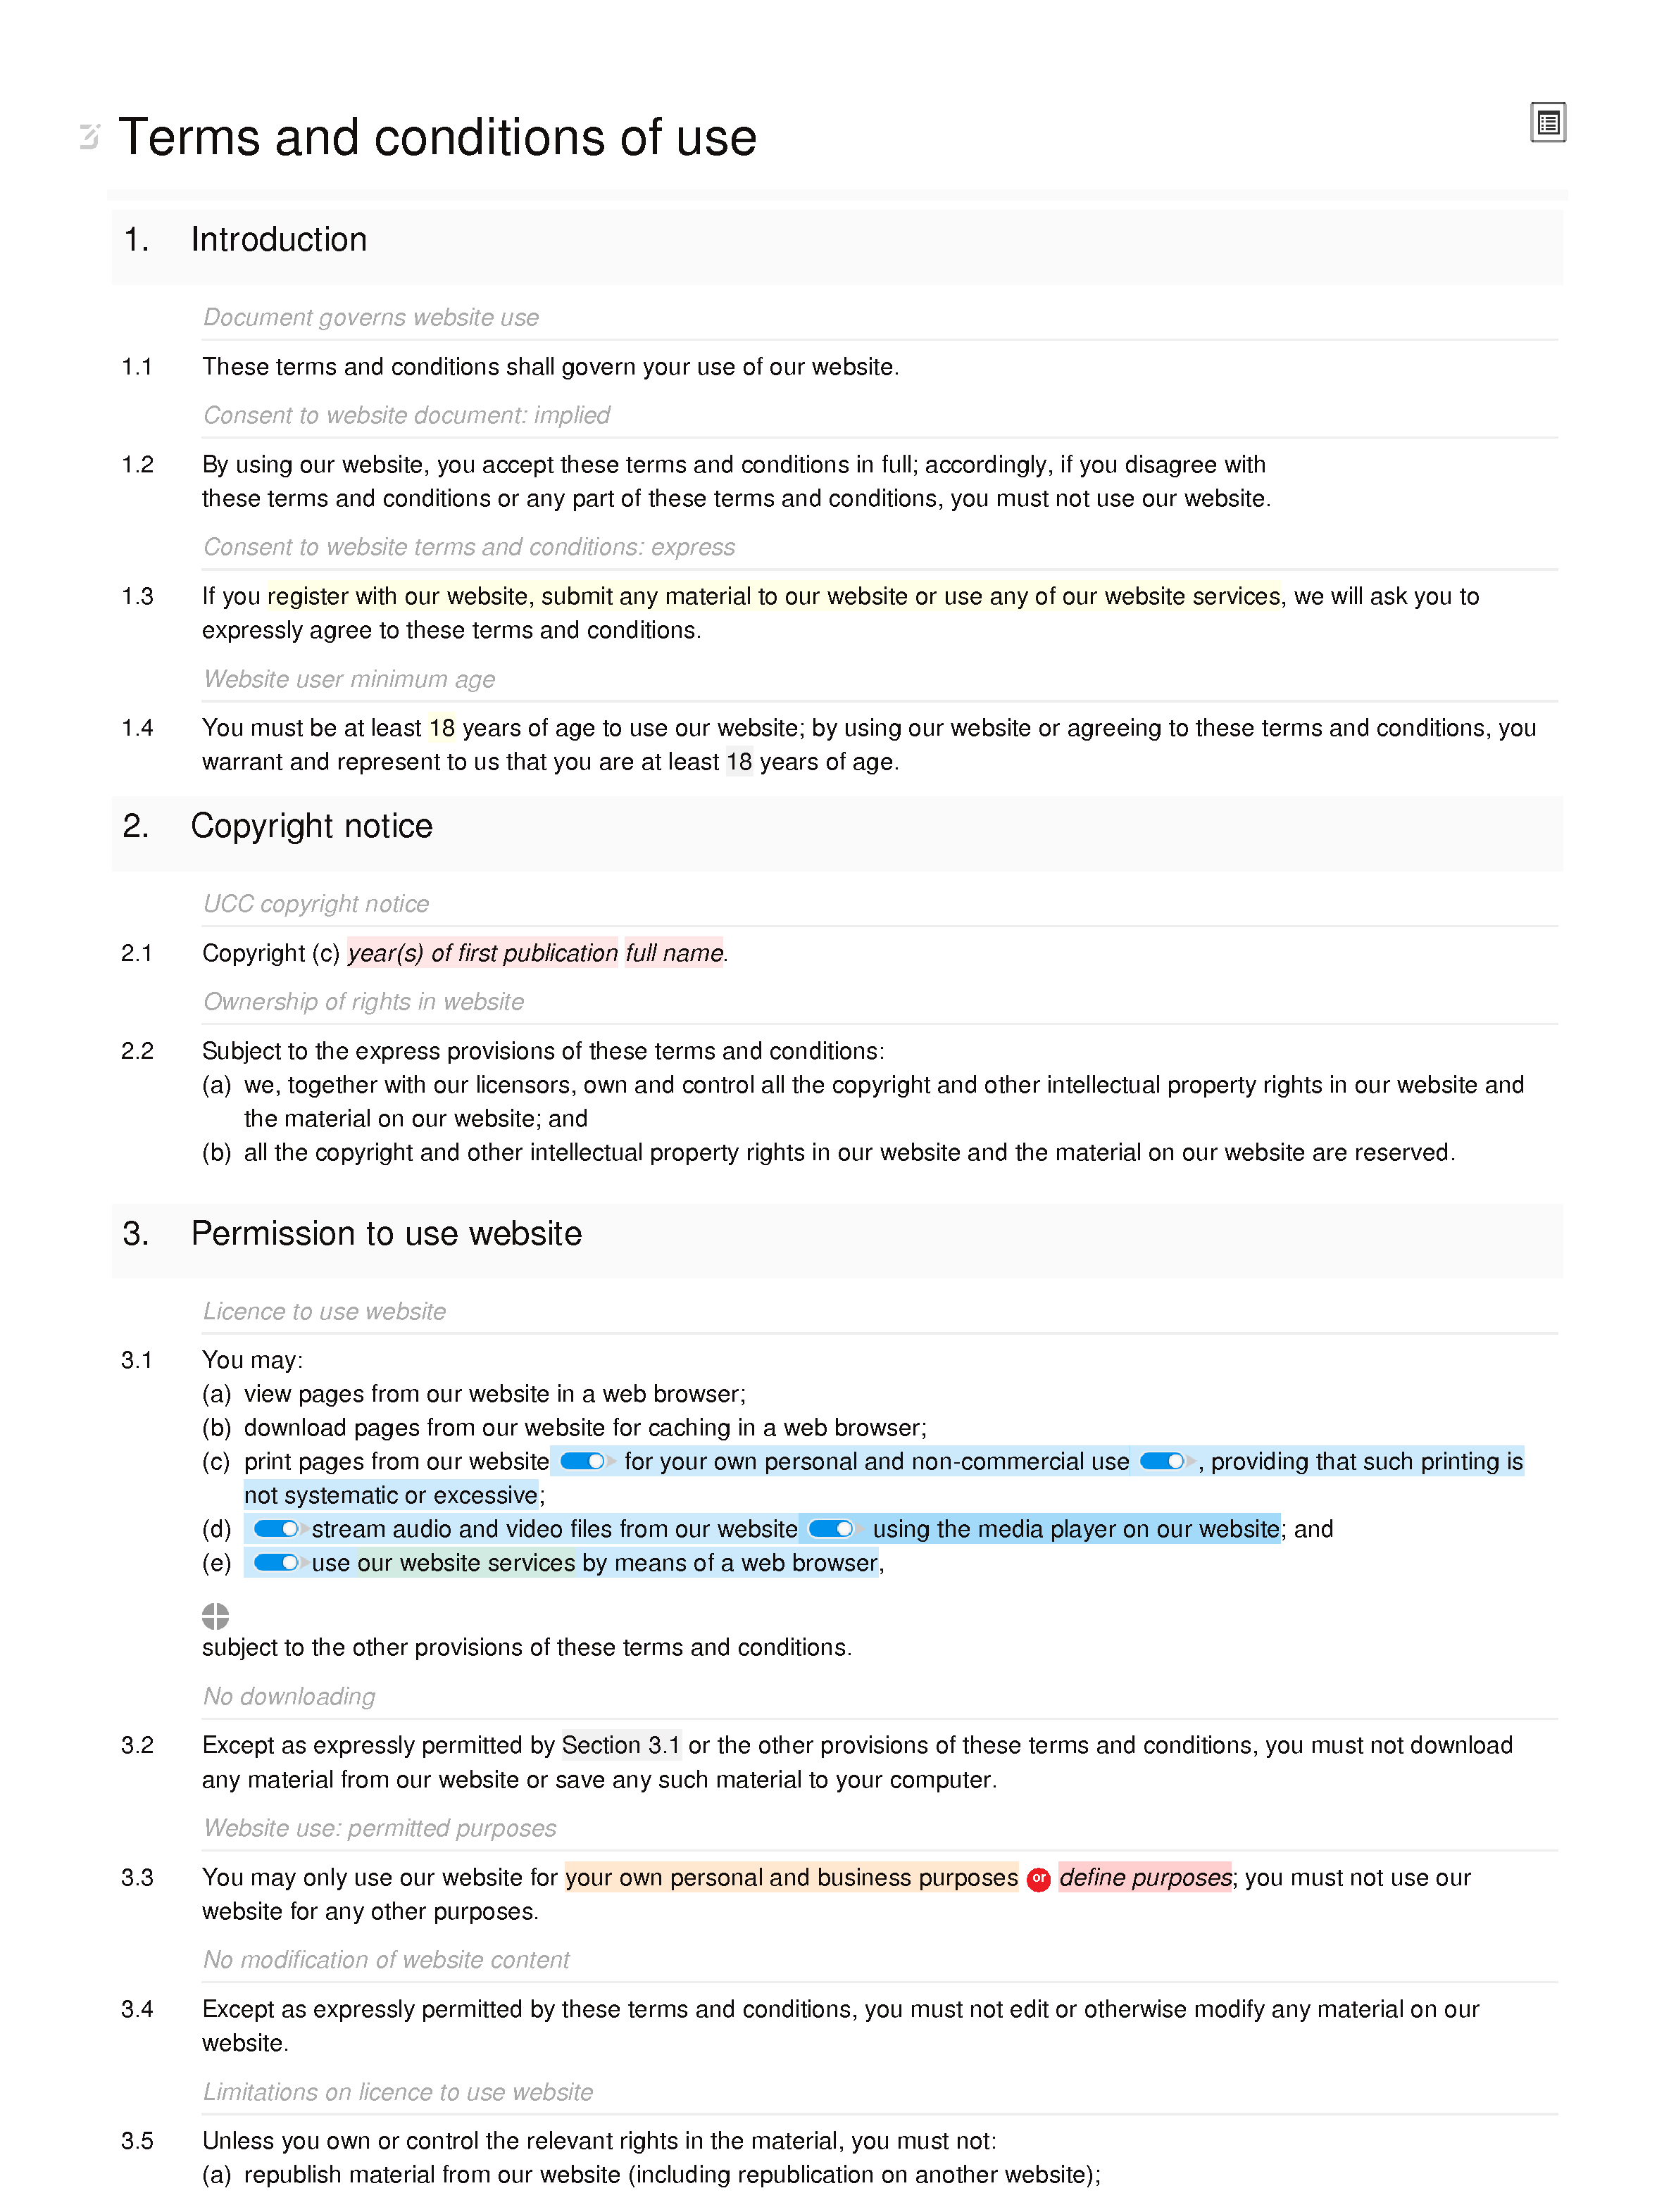 PAYG Q&A website terms and conditions document editor preview